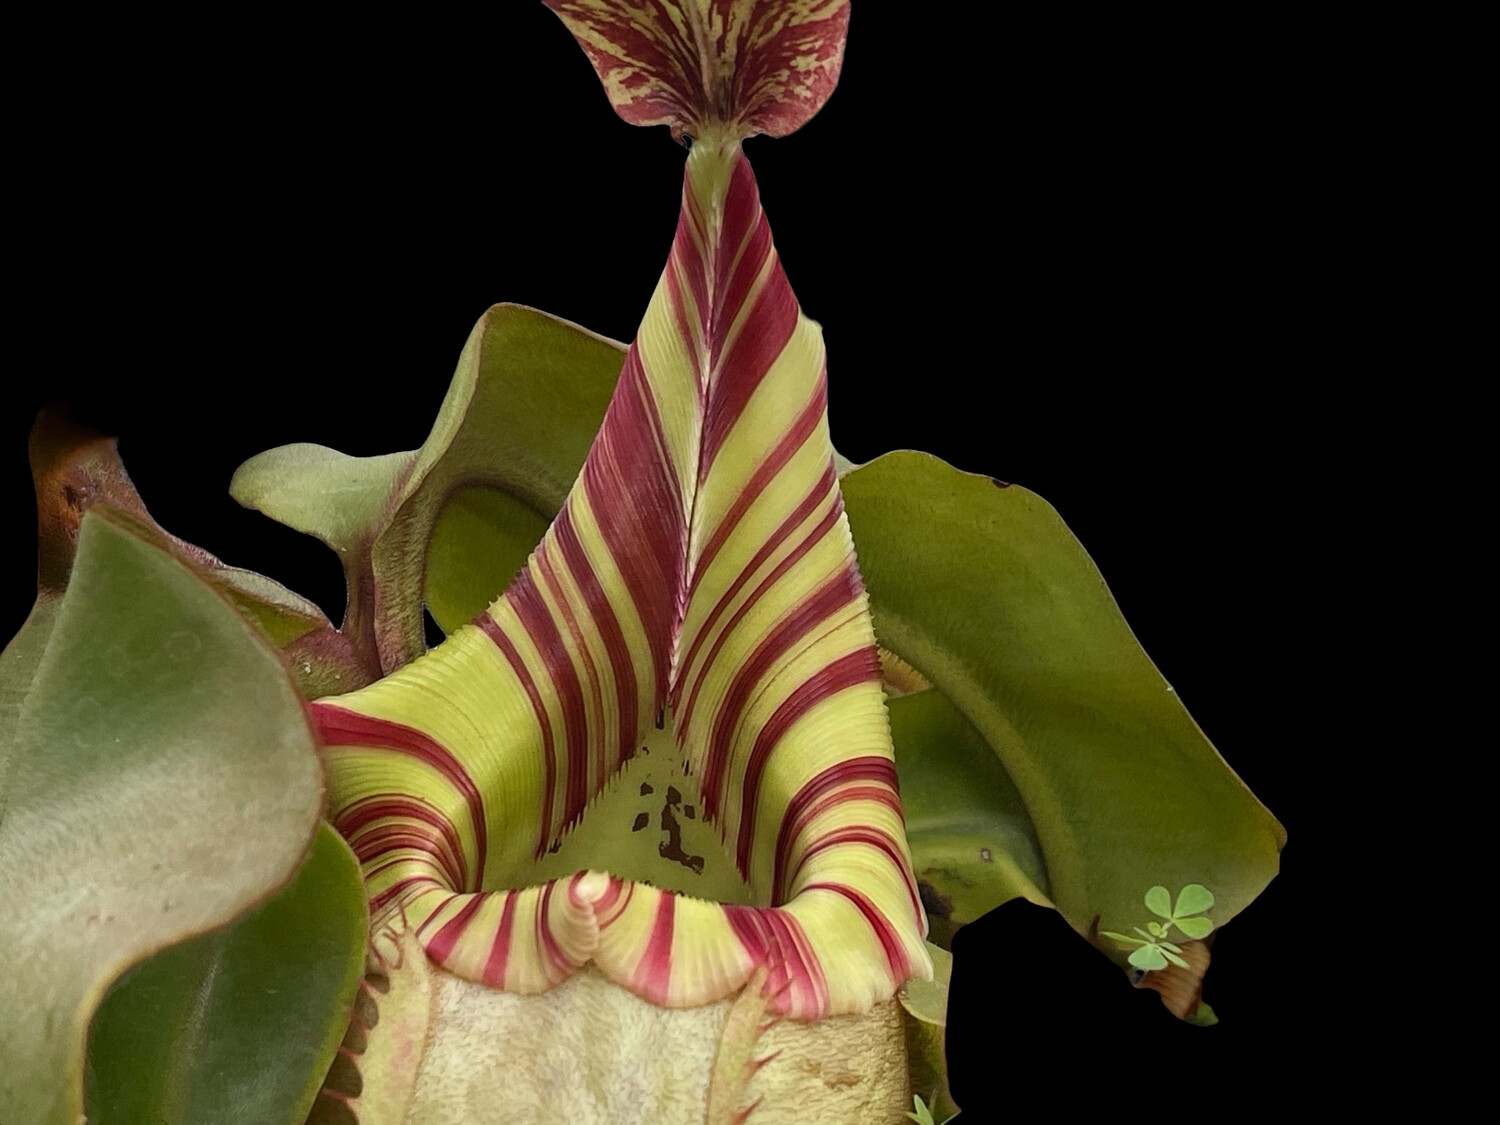 Nepenthes veitchii " Candy Stripe” BE-3734 (Large) 